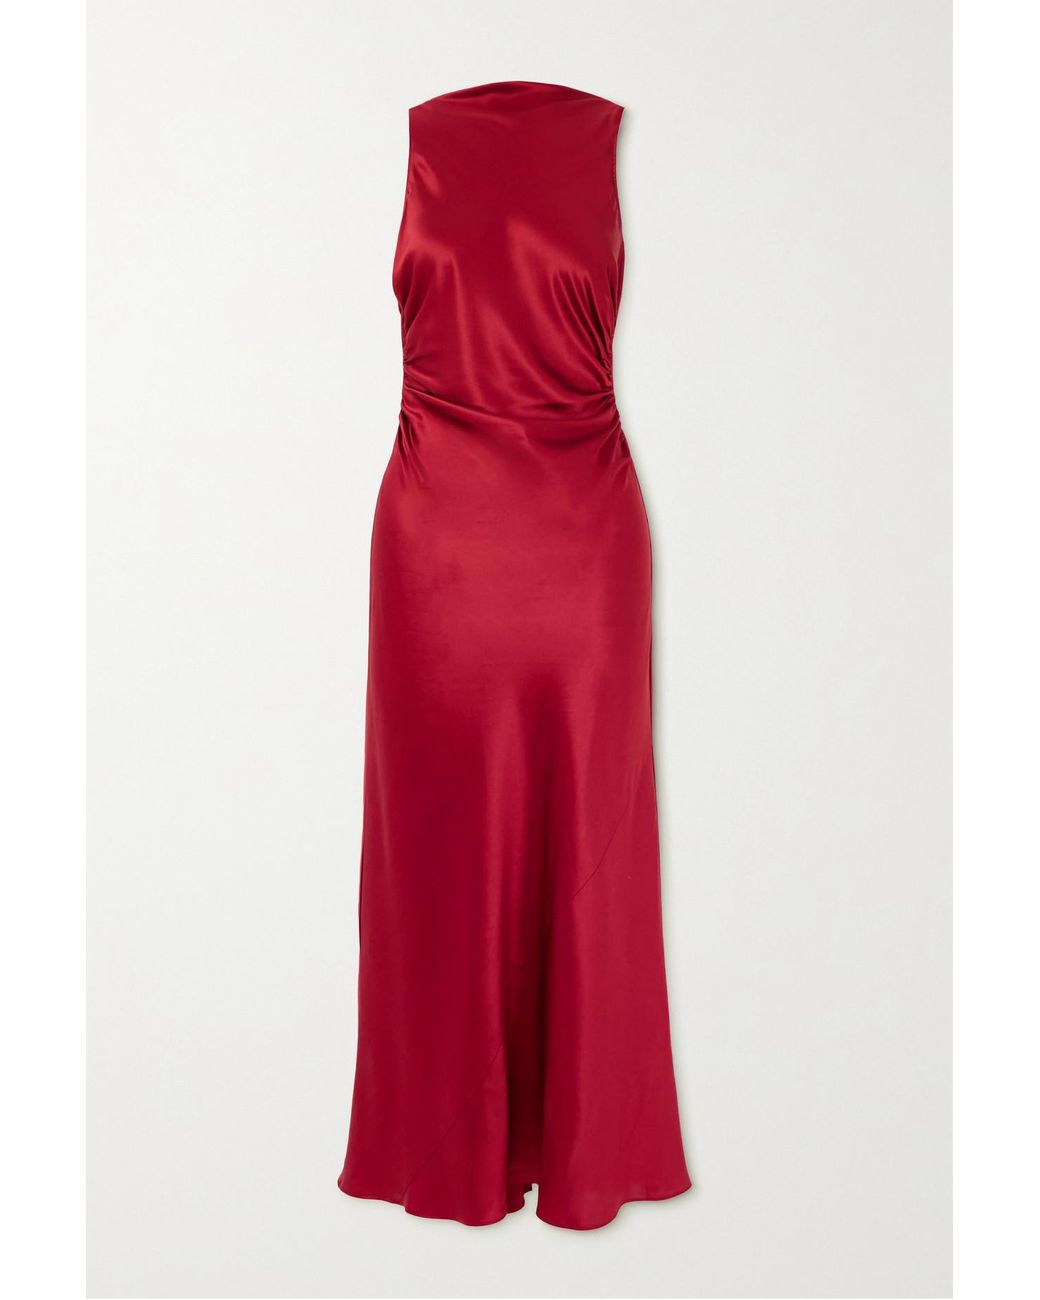 Reformation Casette Cutout Silk-charmeuse Midi Dress in Red | Lyst UK